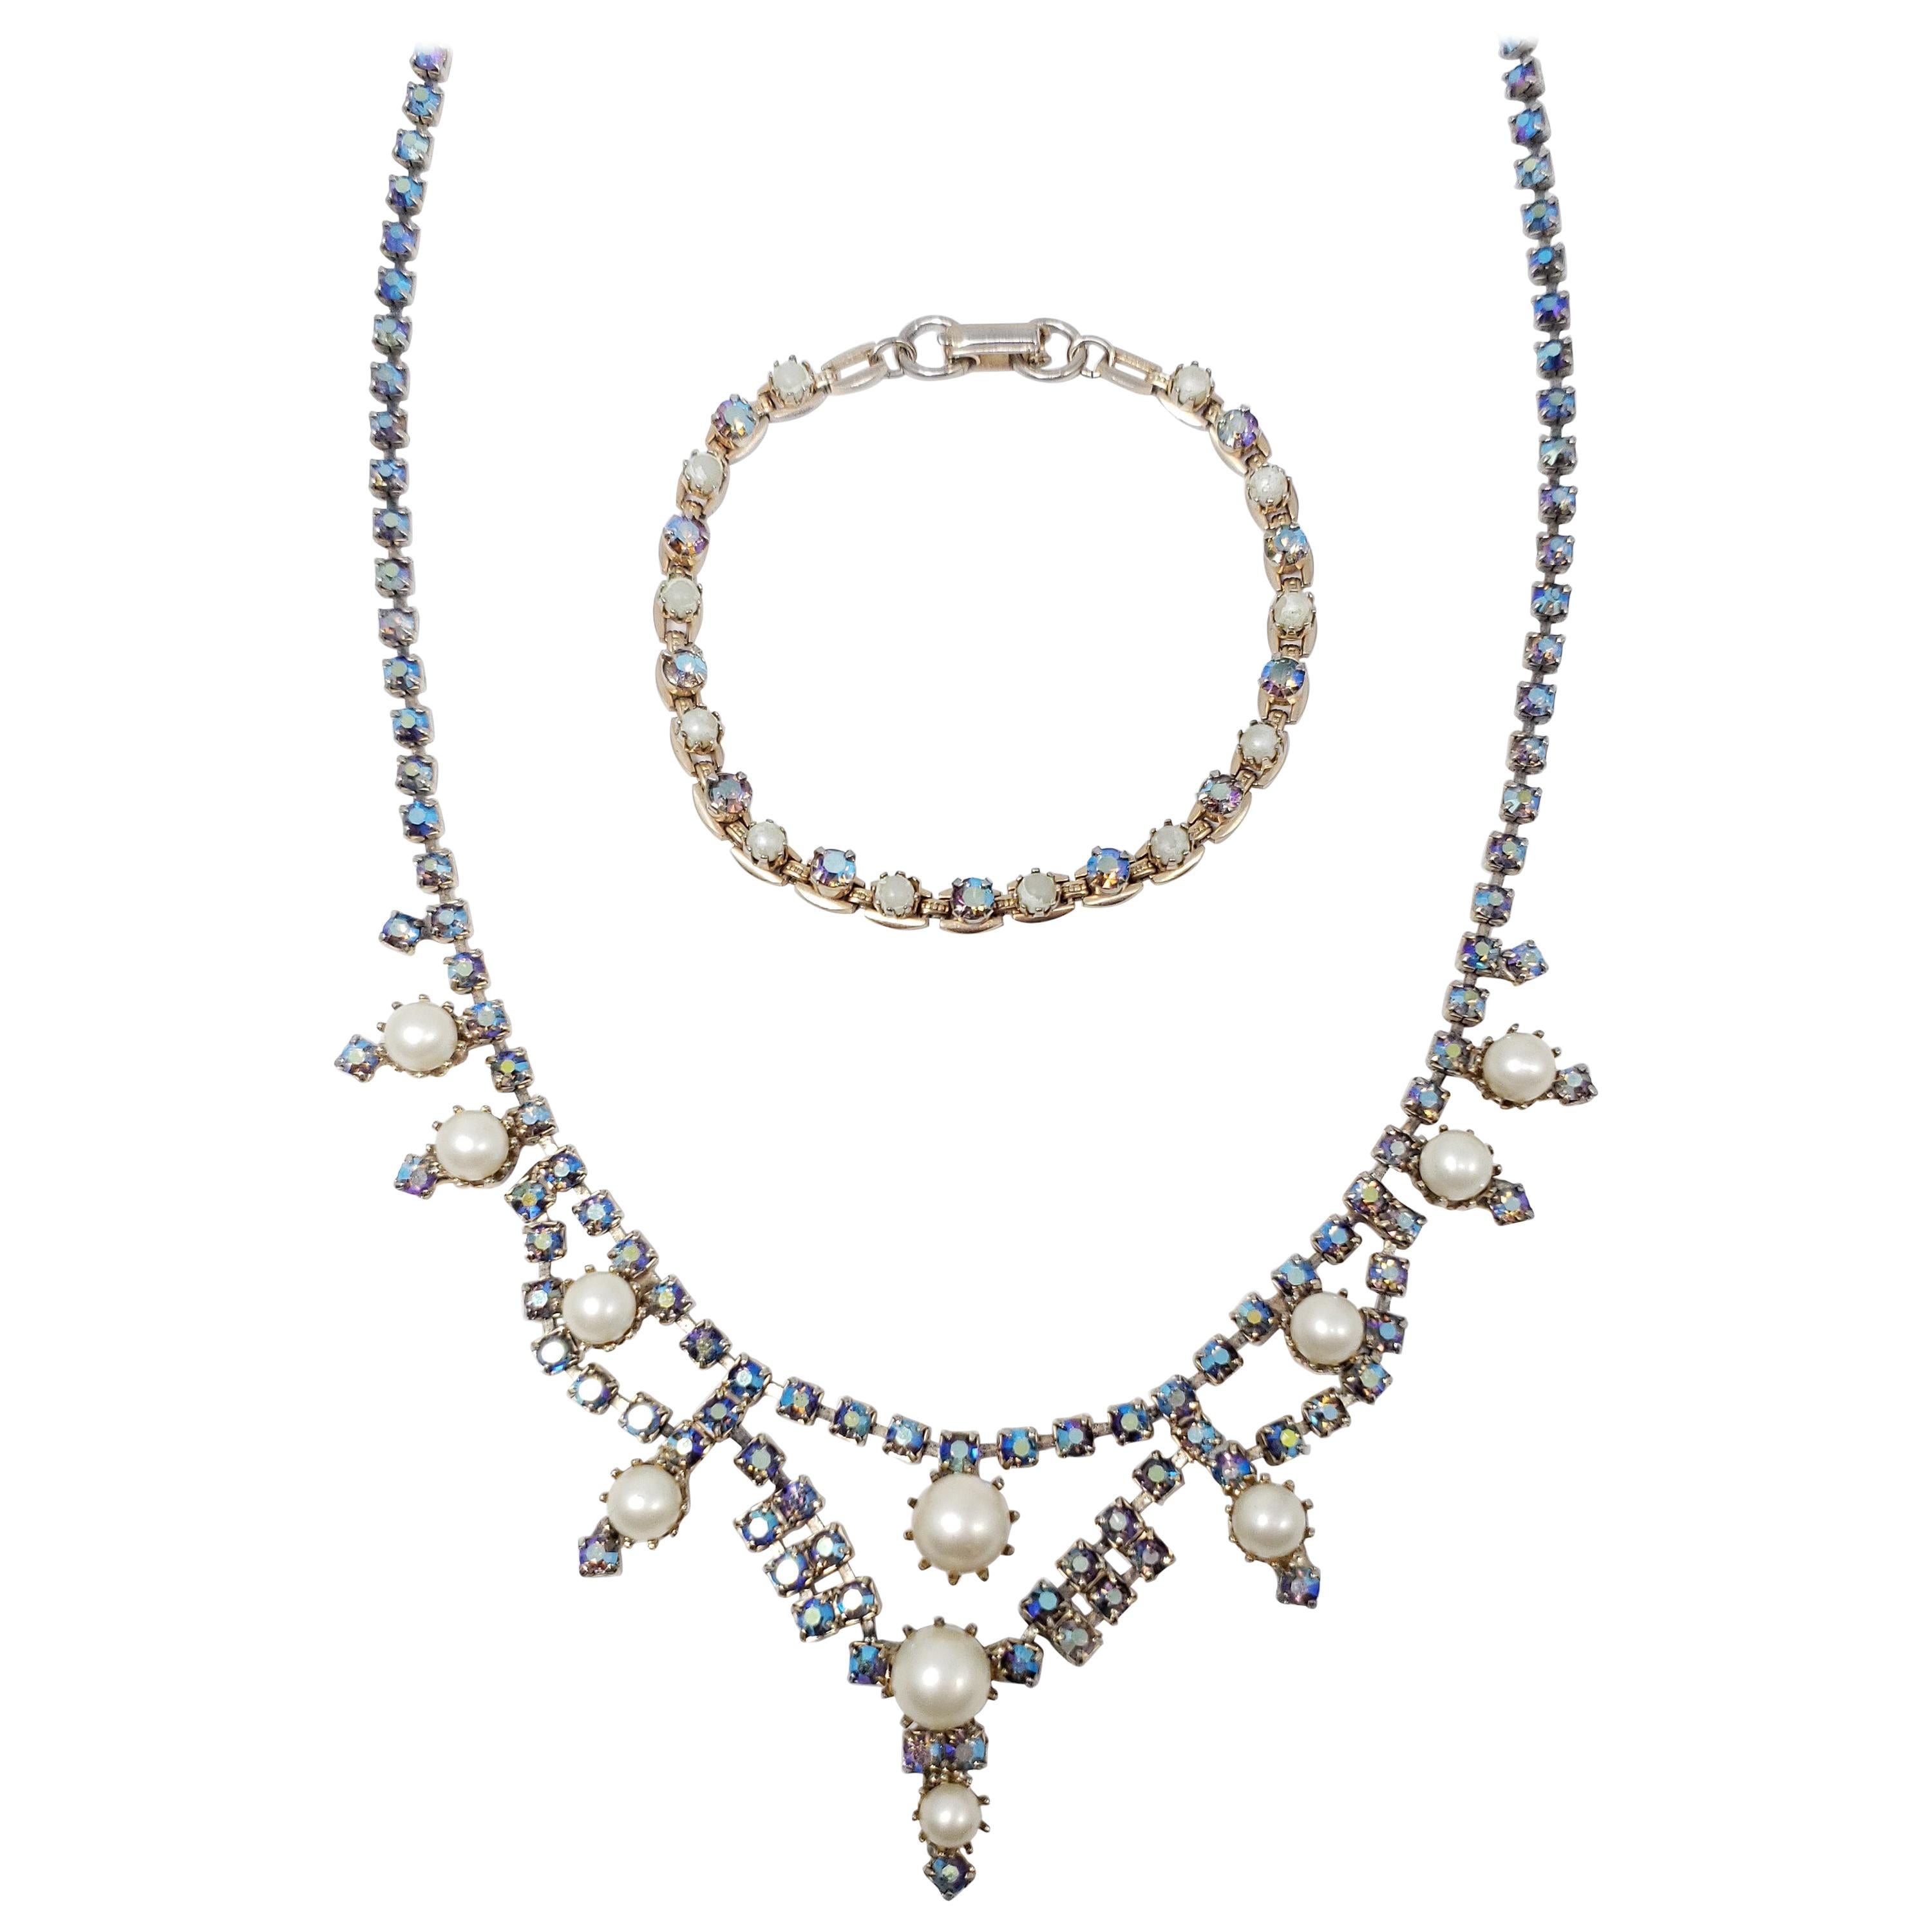 Icy Sapphire Aurora Borealis Crystal and Faux Pearl Necklace and Bracelet, 1950s